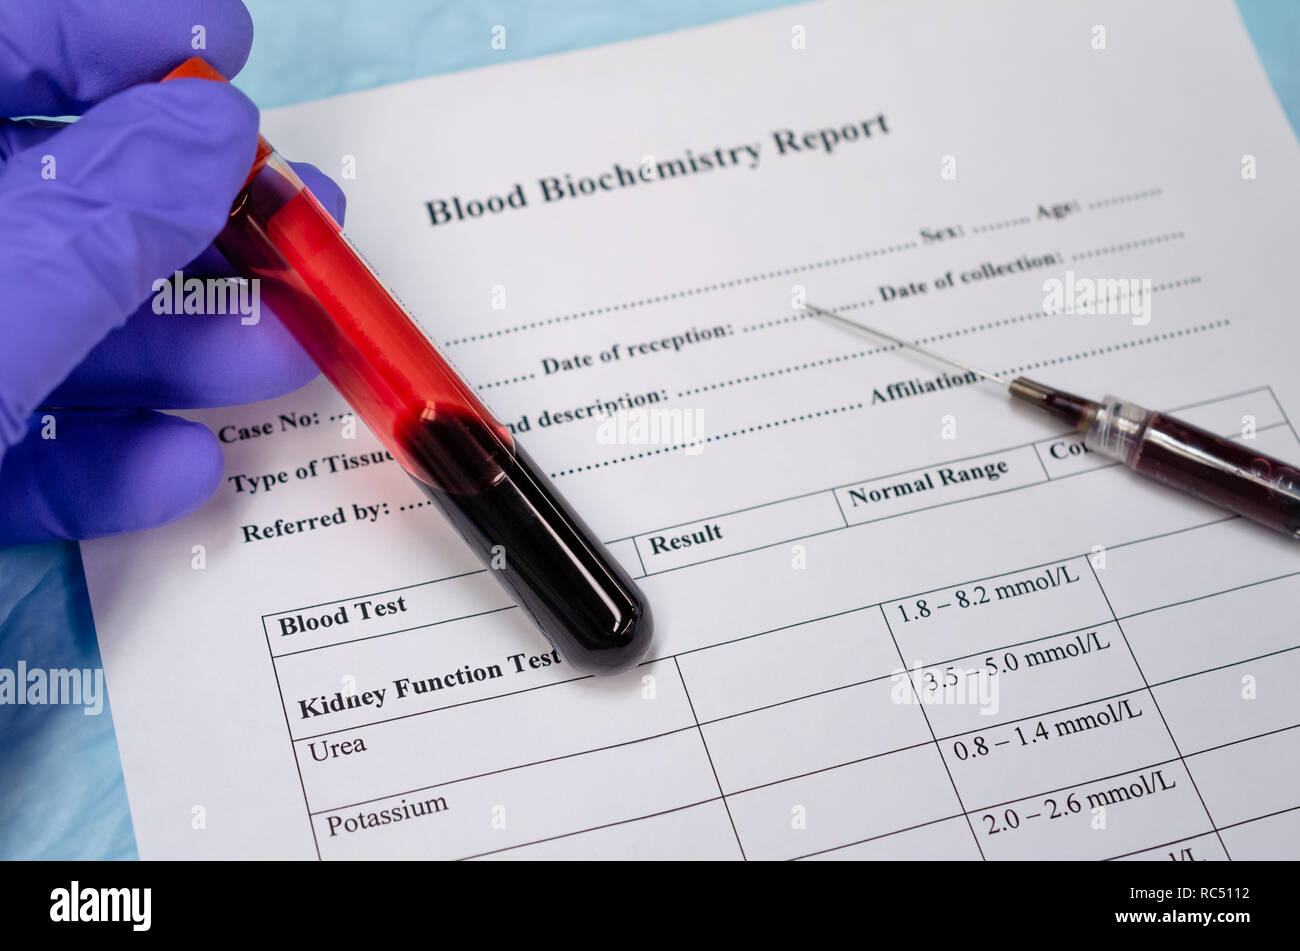 Collection of blood for blood biochemistry analysis for metabolic diseases Stock Photo